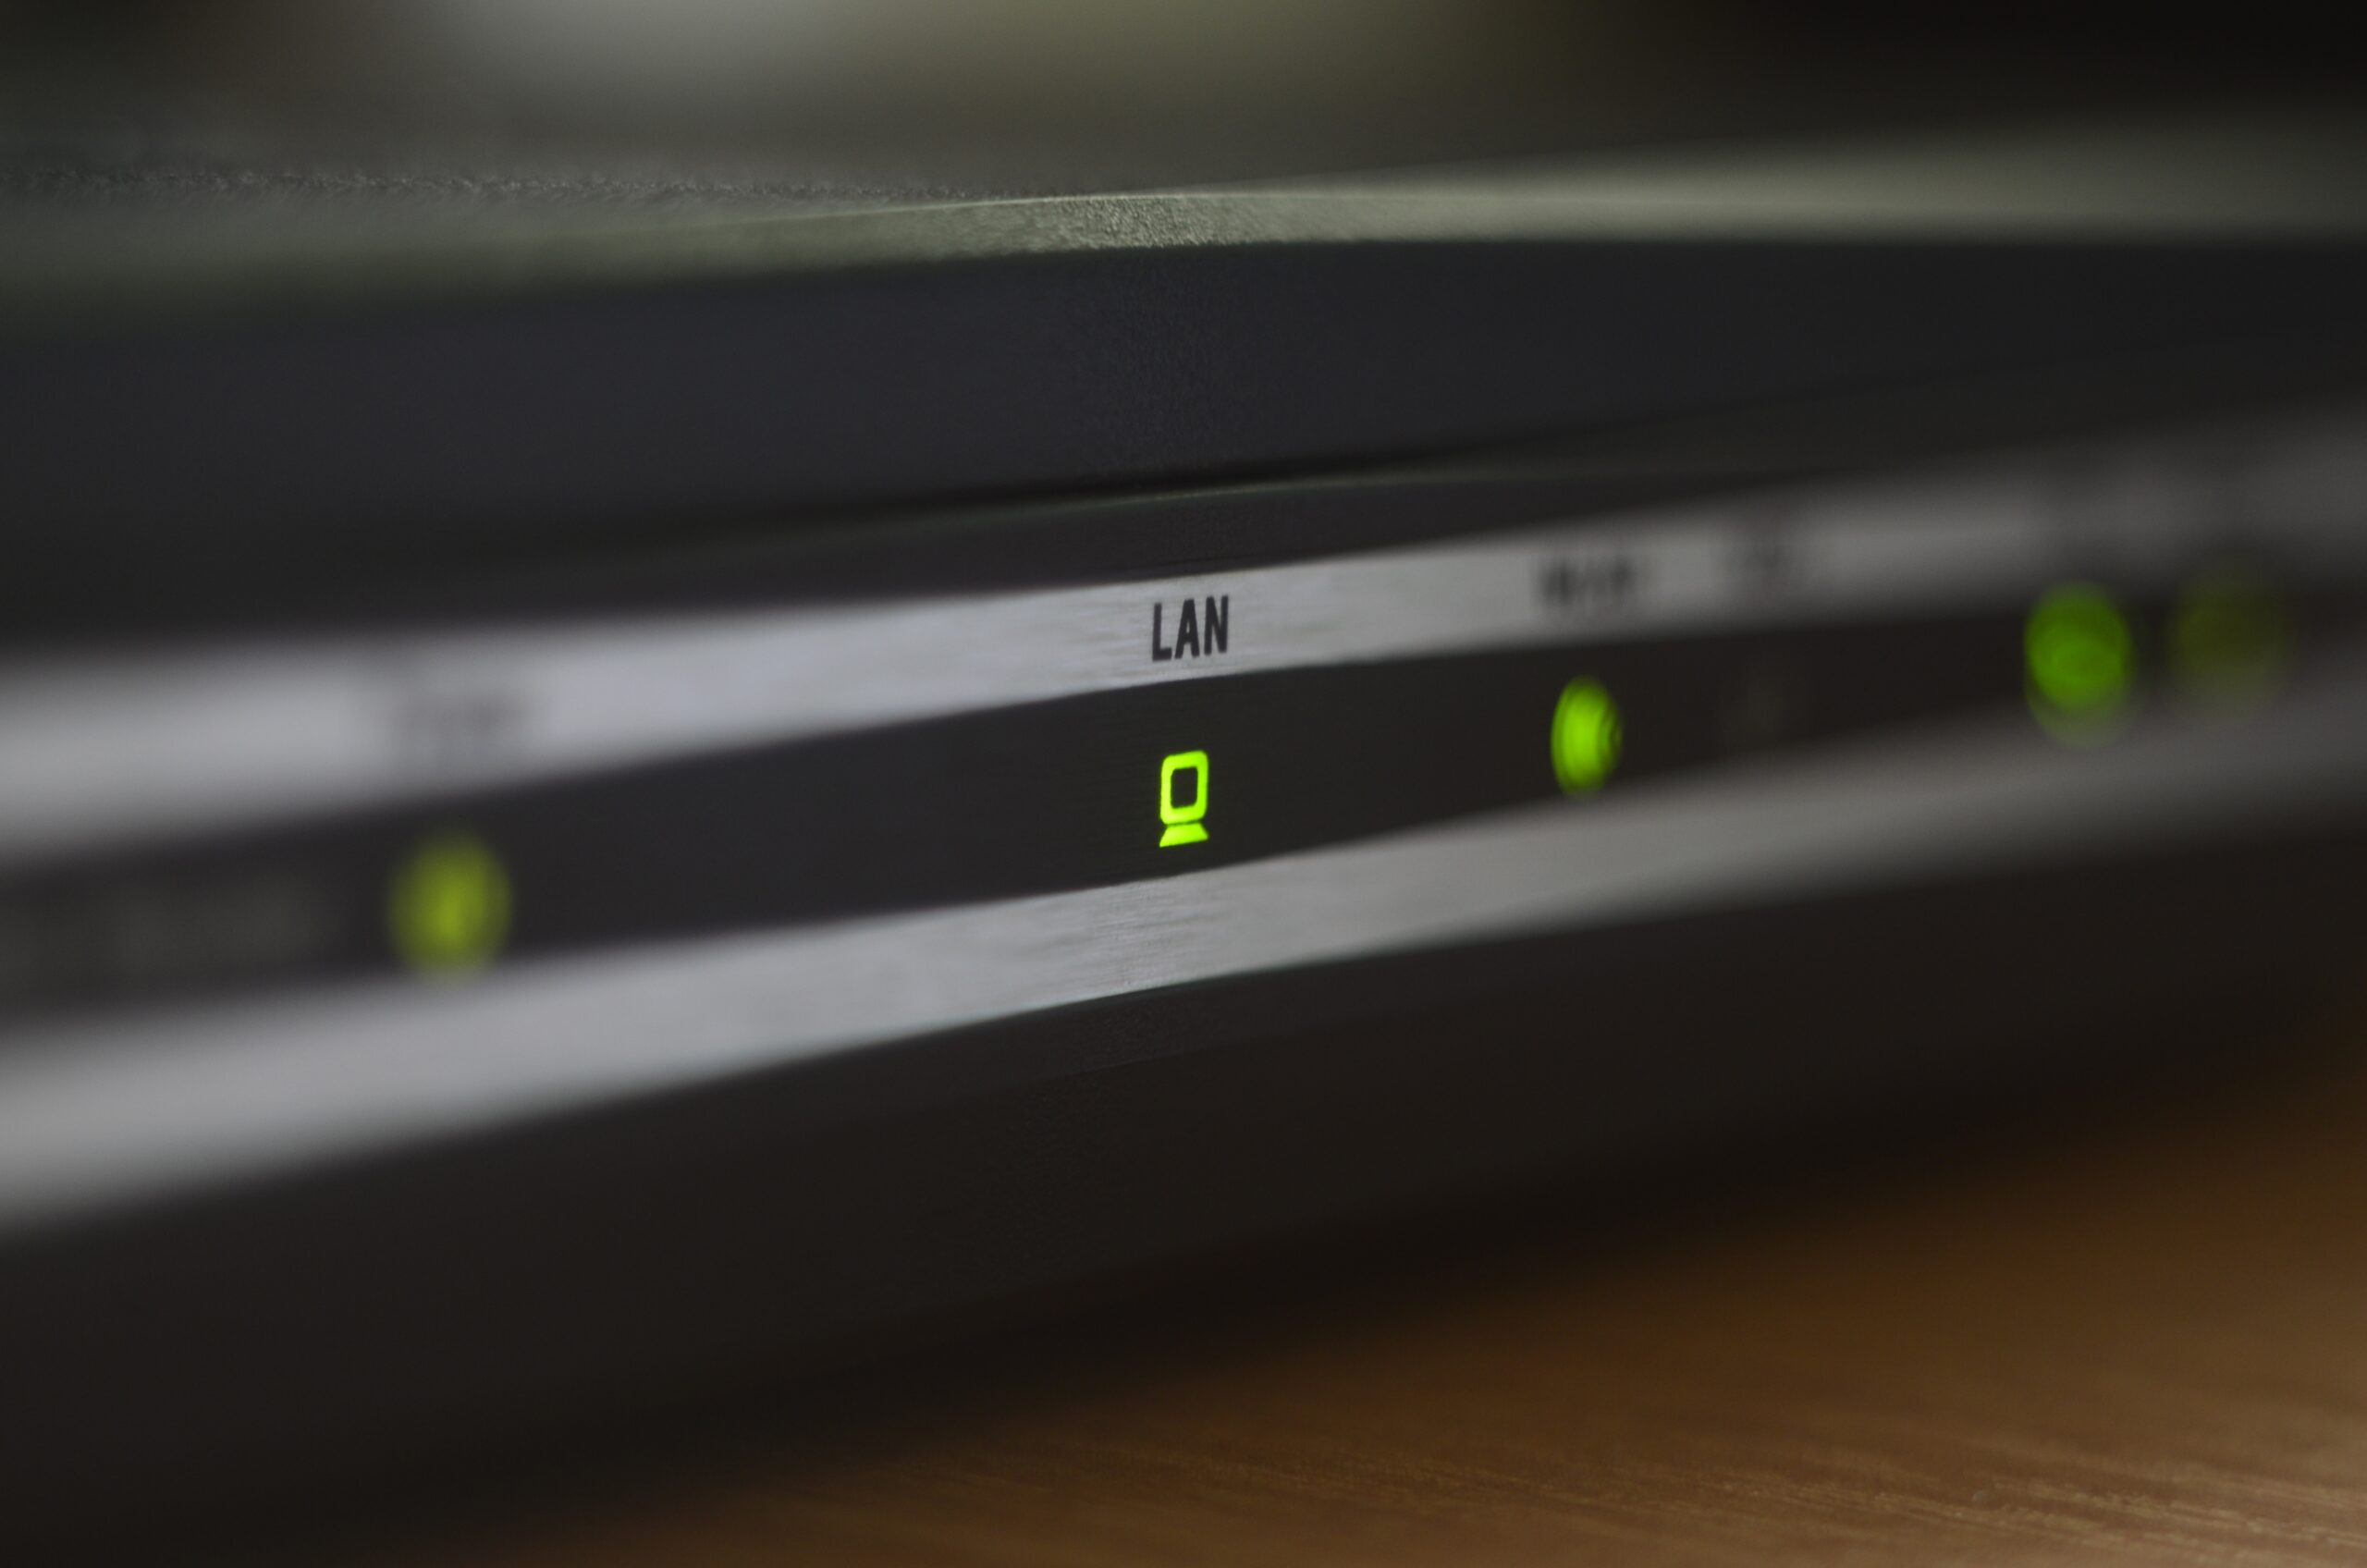 Macro of internet modem, abstract technology background. Green "LAN" indicator on internet router